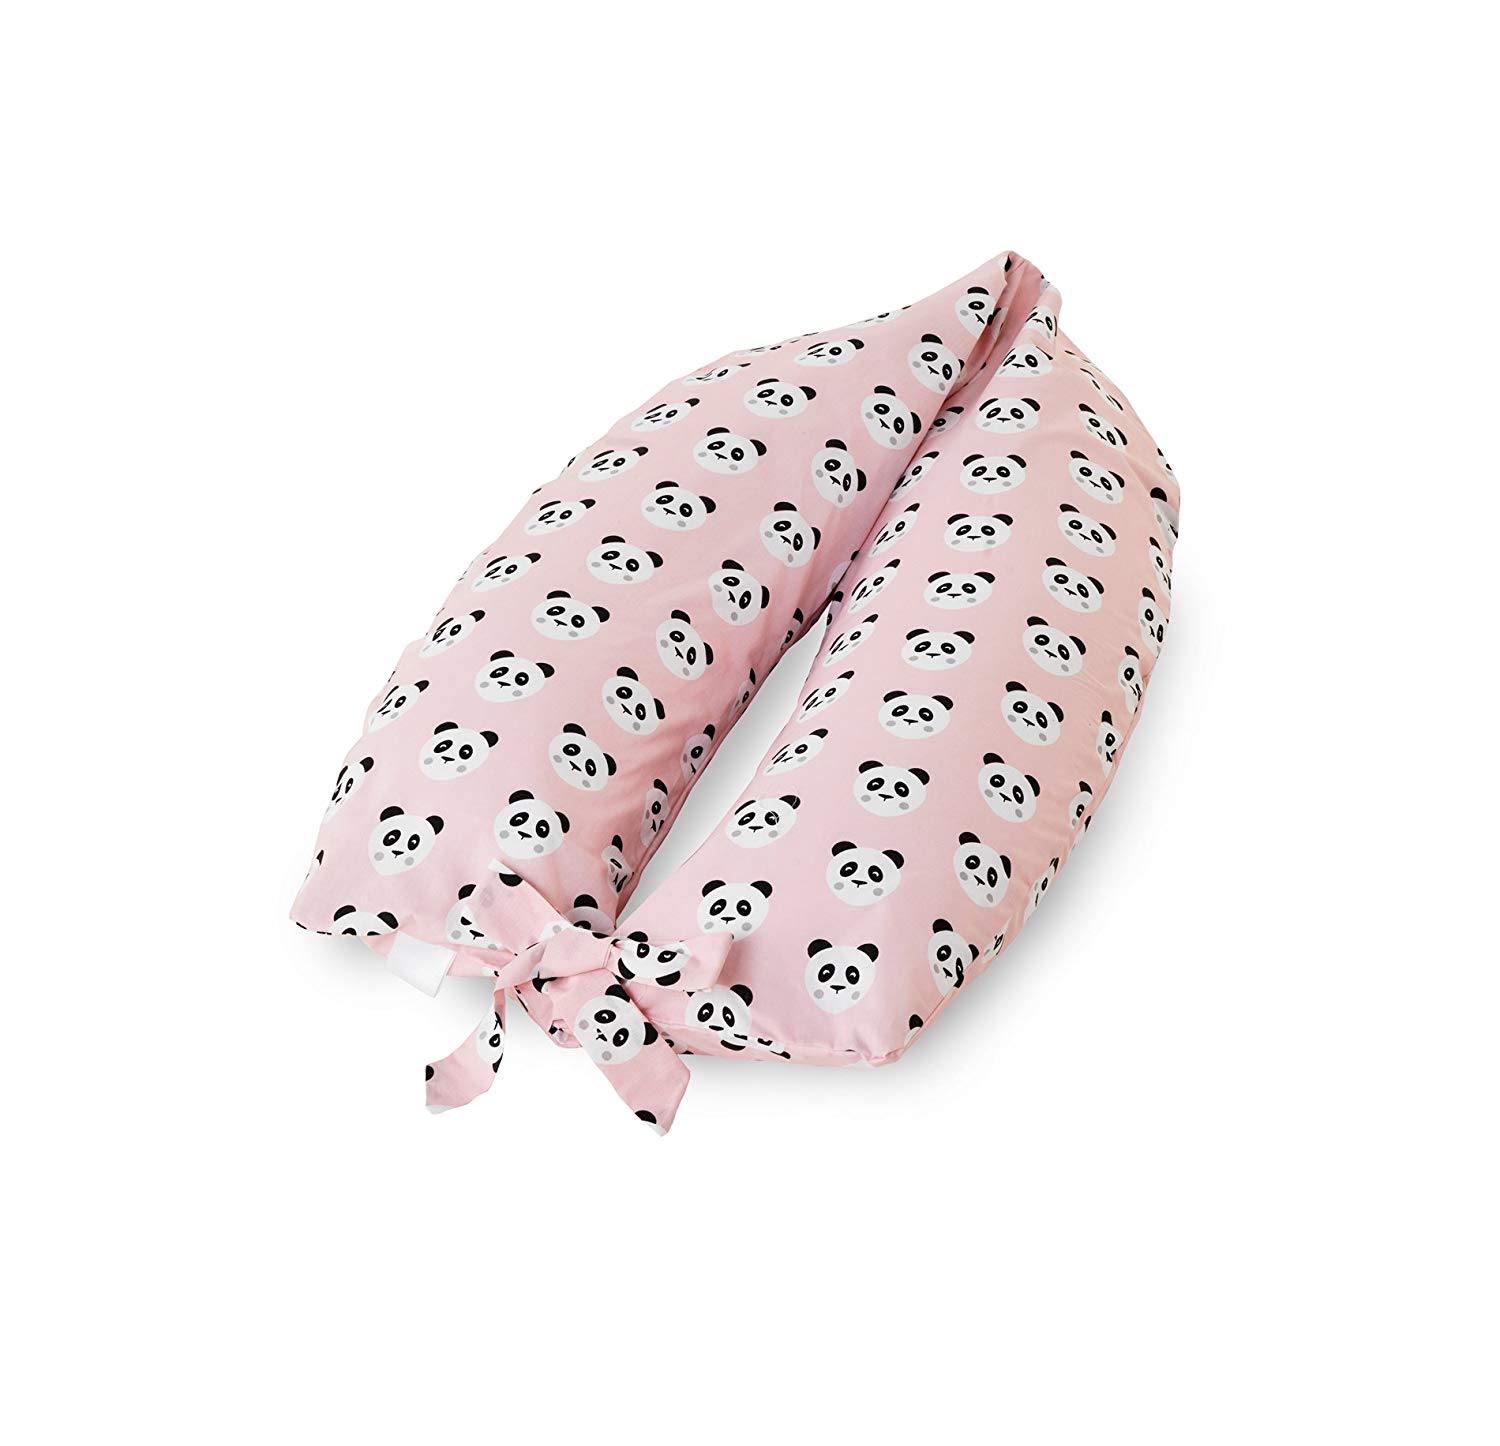 Funny Baby 627503 Nursing Pillow for Nursery Pandy Pink